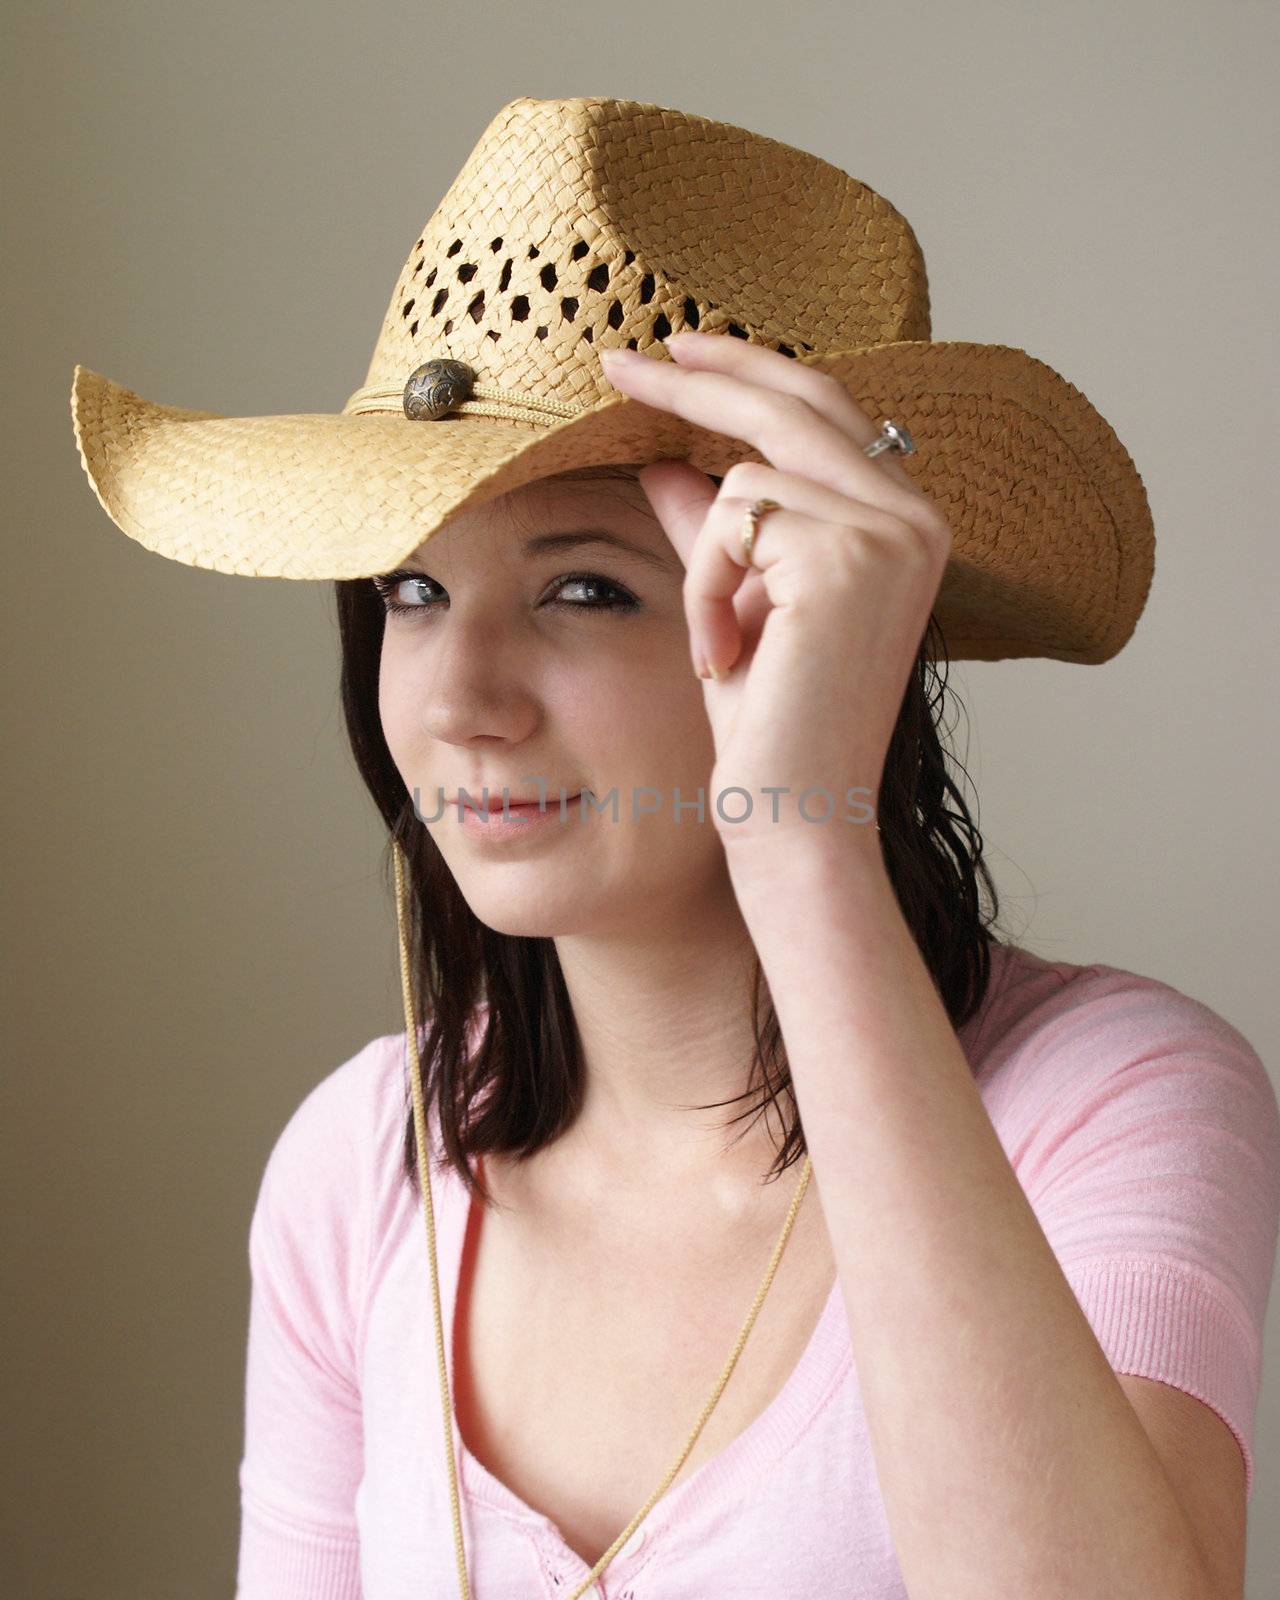 A young girl is tipping her straw hat in this casual portrait.